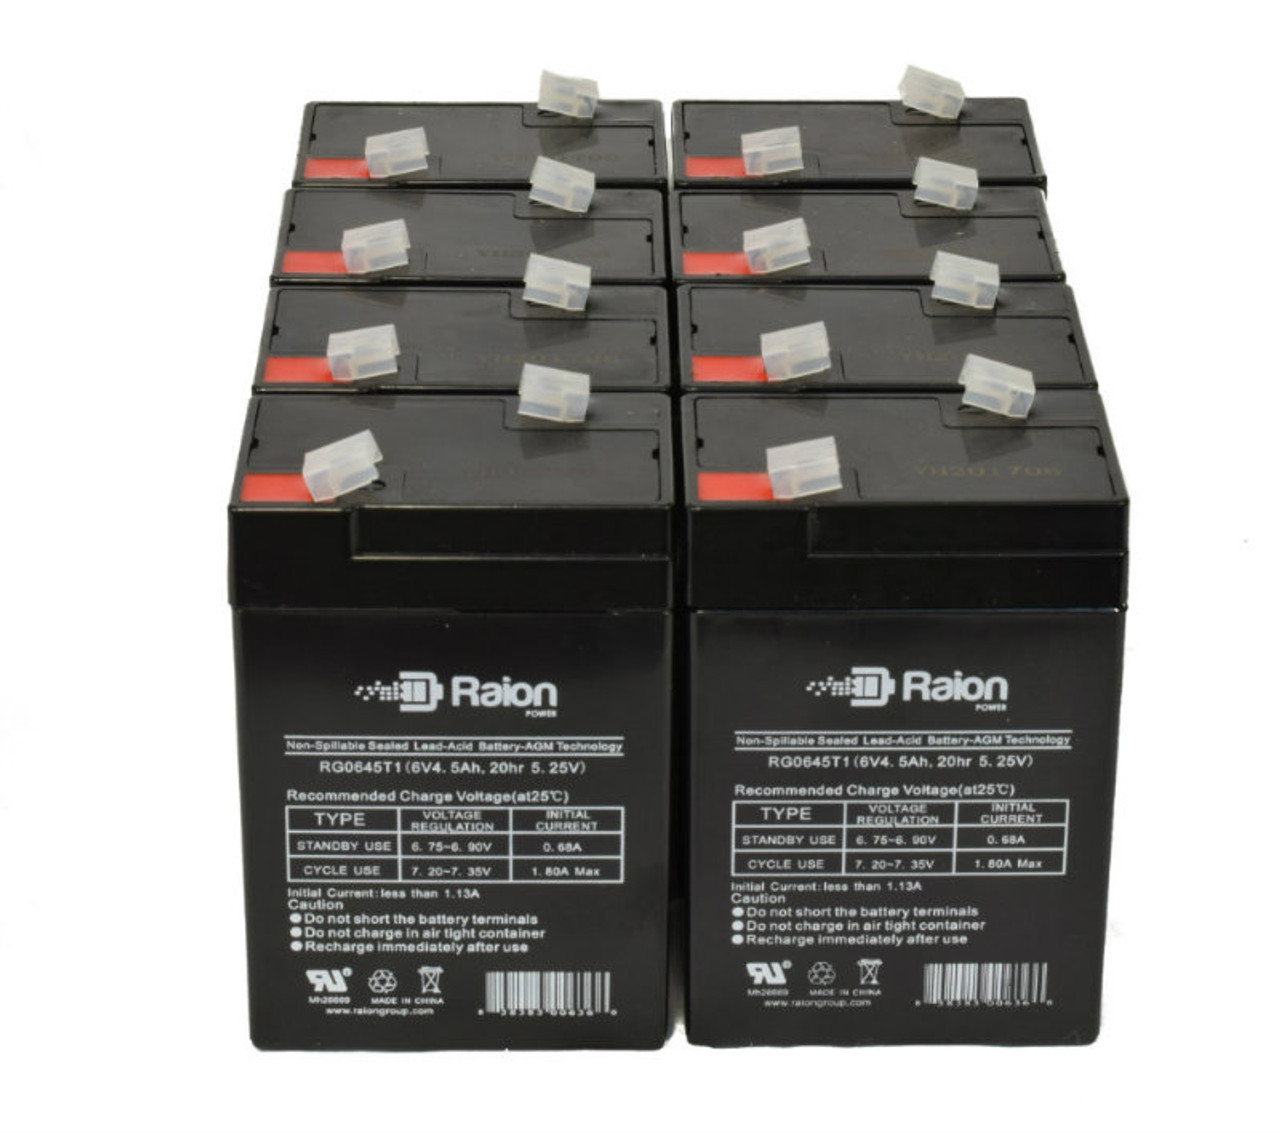 Raion Power 6V 4.5Ah Replacement Emergency Light Battery for Dual-Lite EZ-2R (Current) - 8 Pack